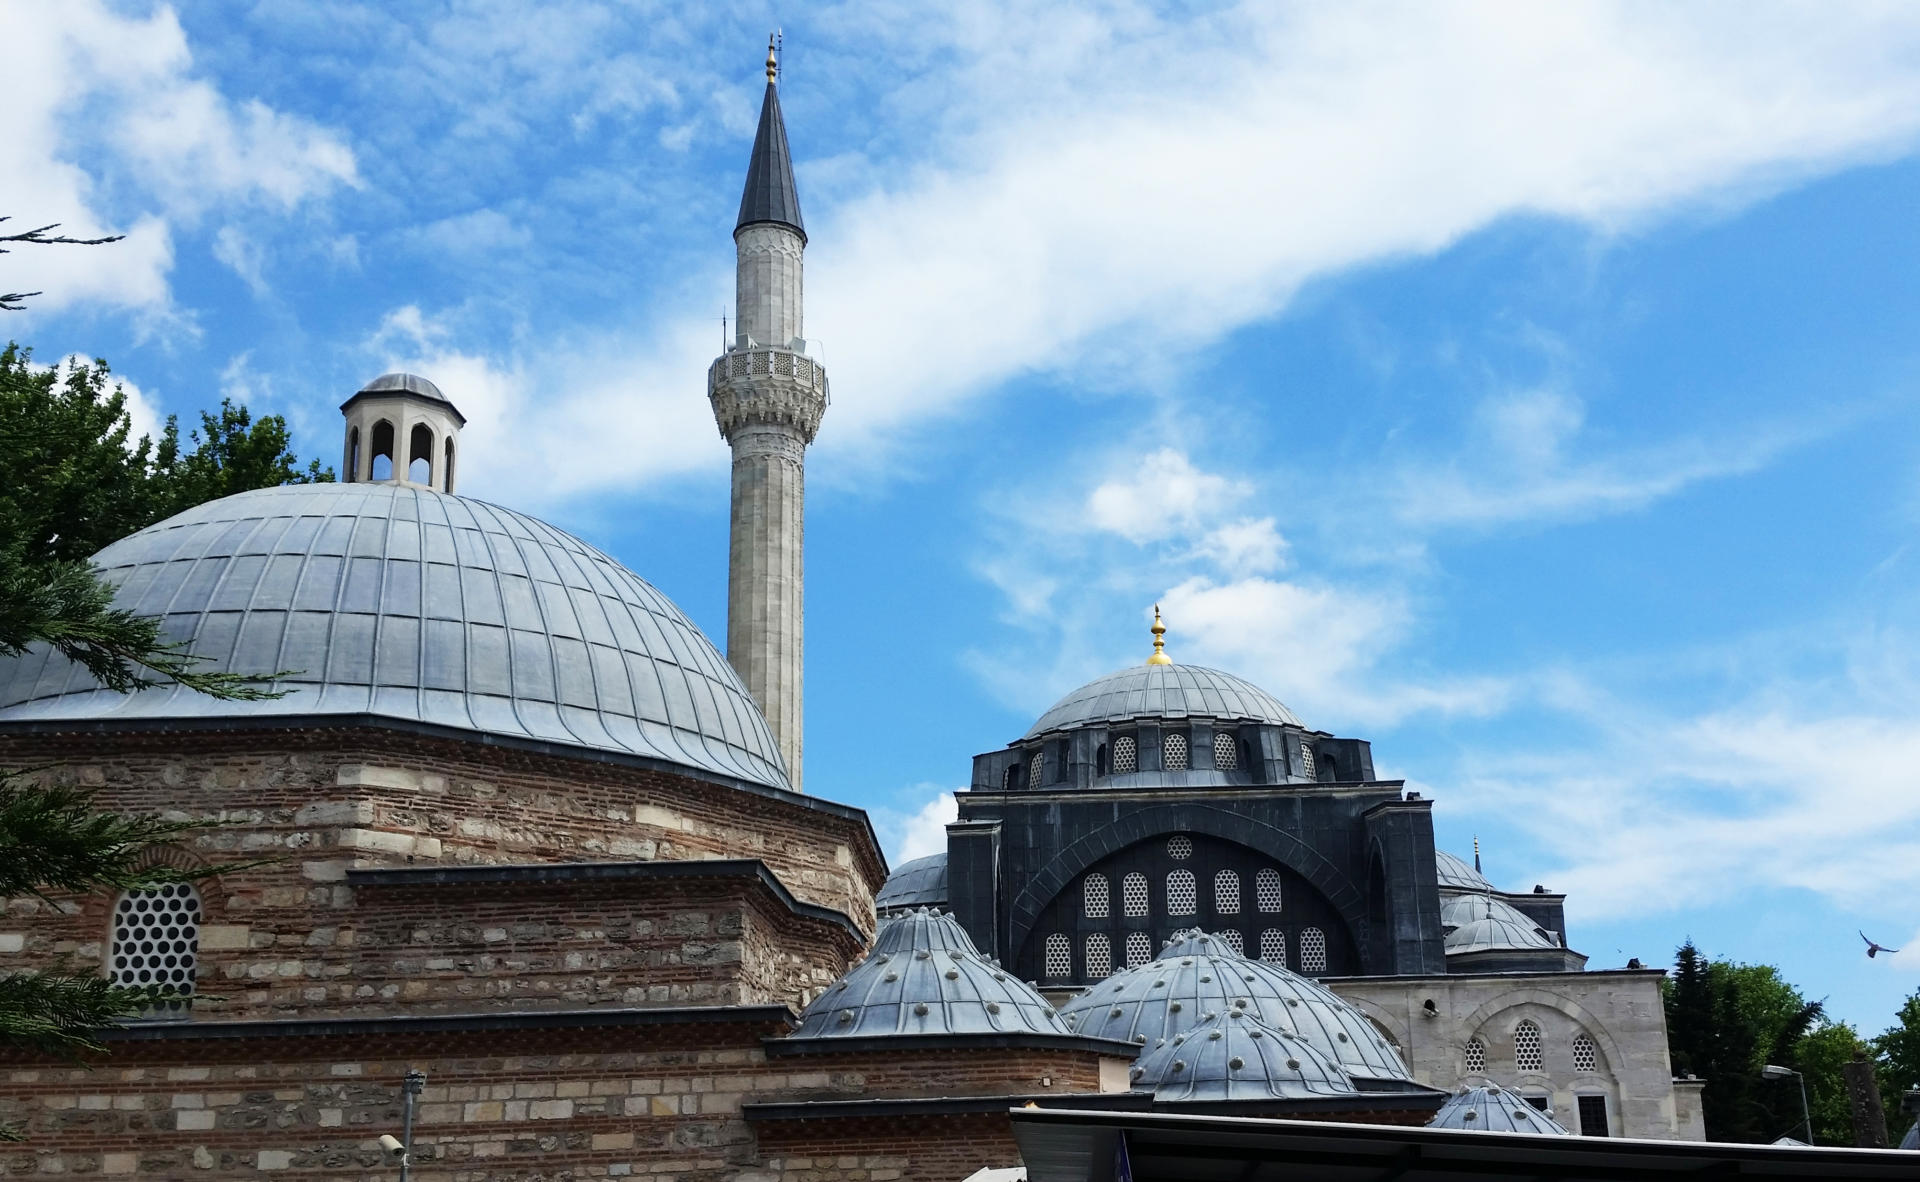 Sultan Ahmed Mosque (The Blue Mosque) 